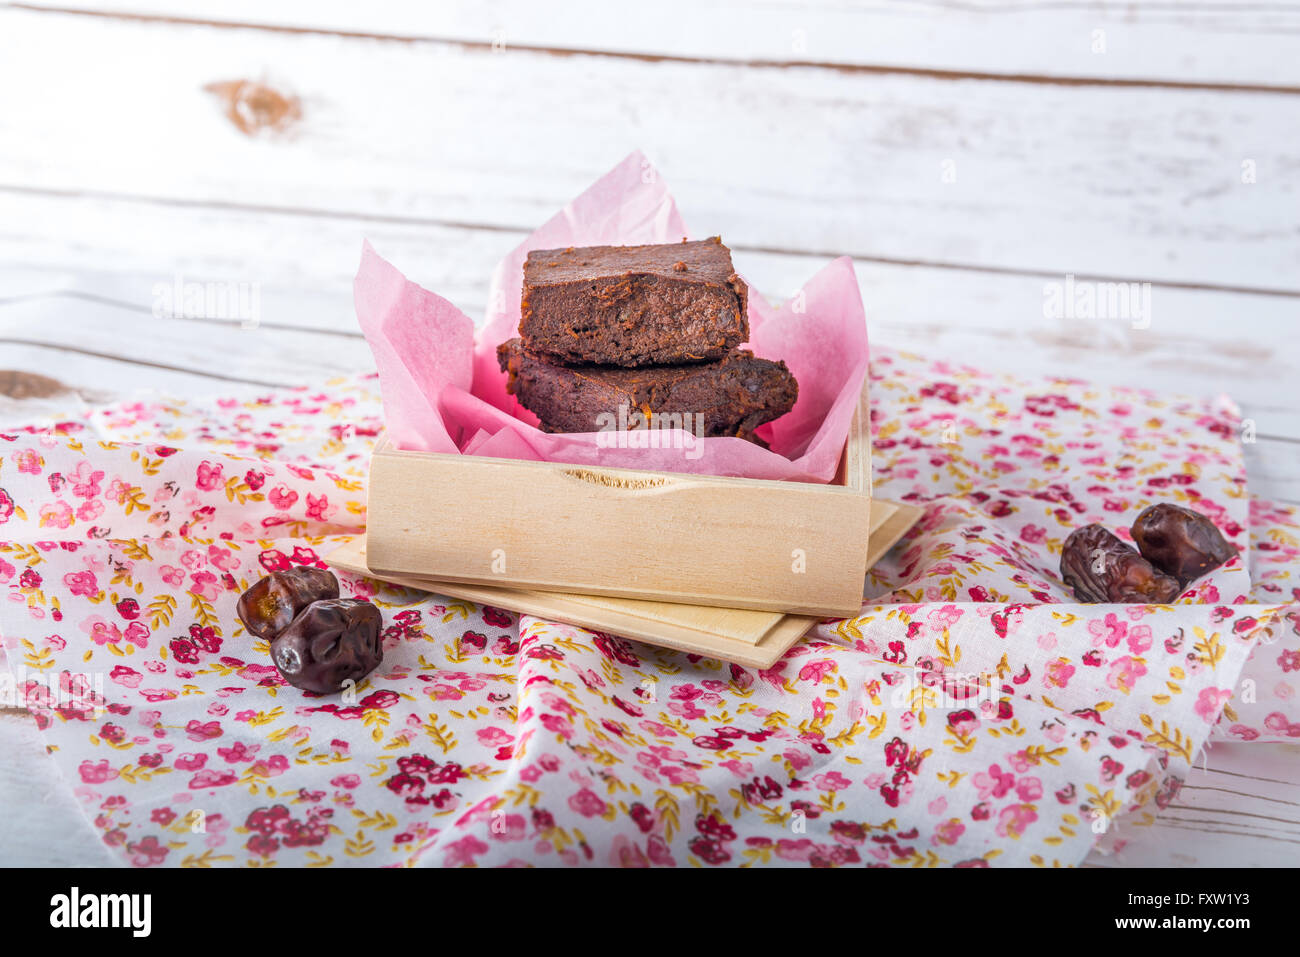 Healthy gluten free Paleo style brownies made with sweet potato, dates and almond flour in a wooden box Stock Photo